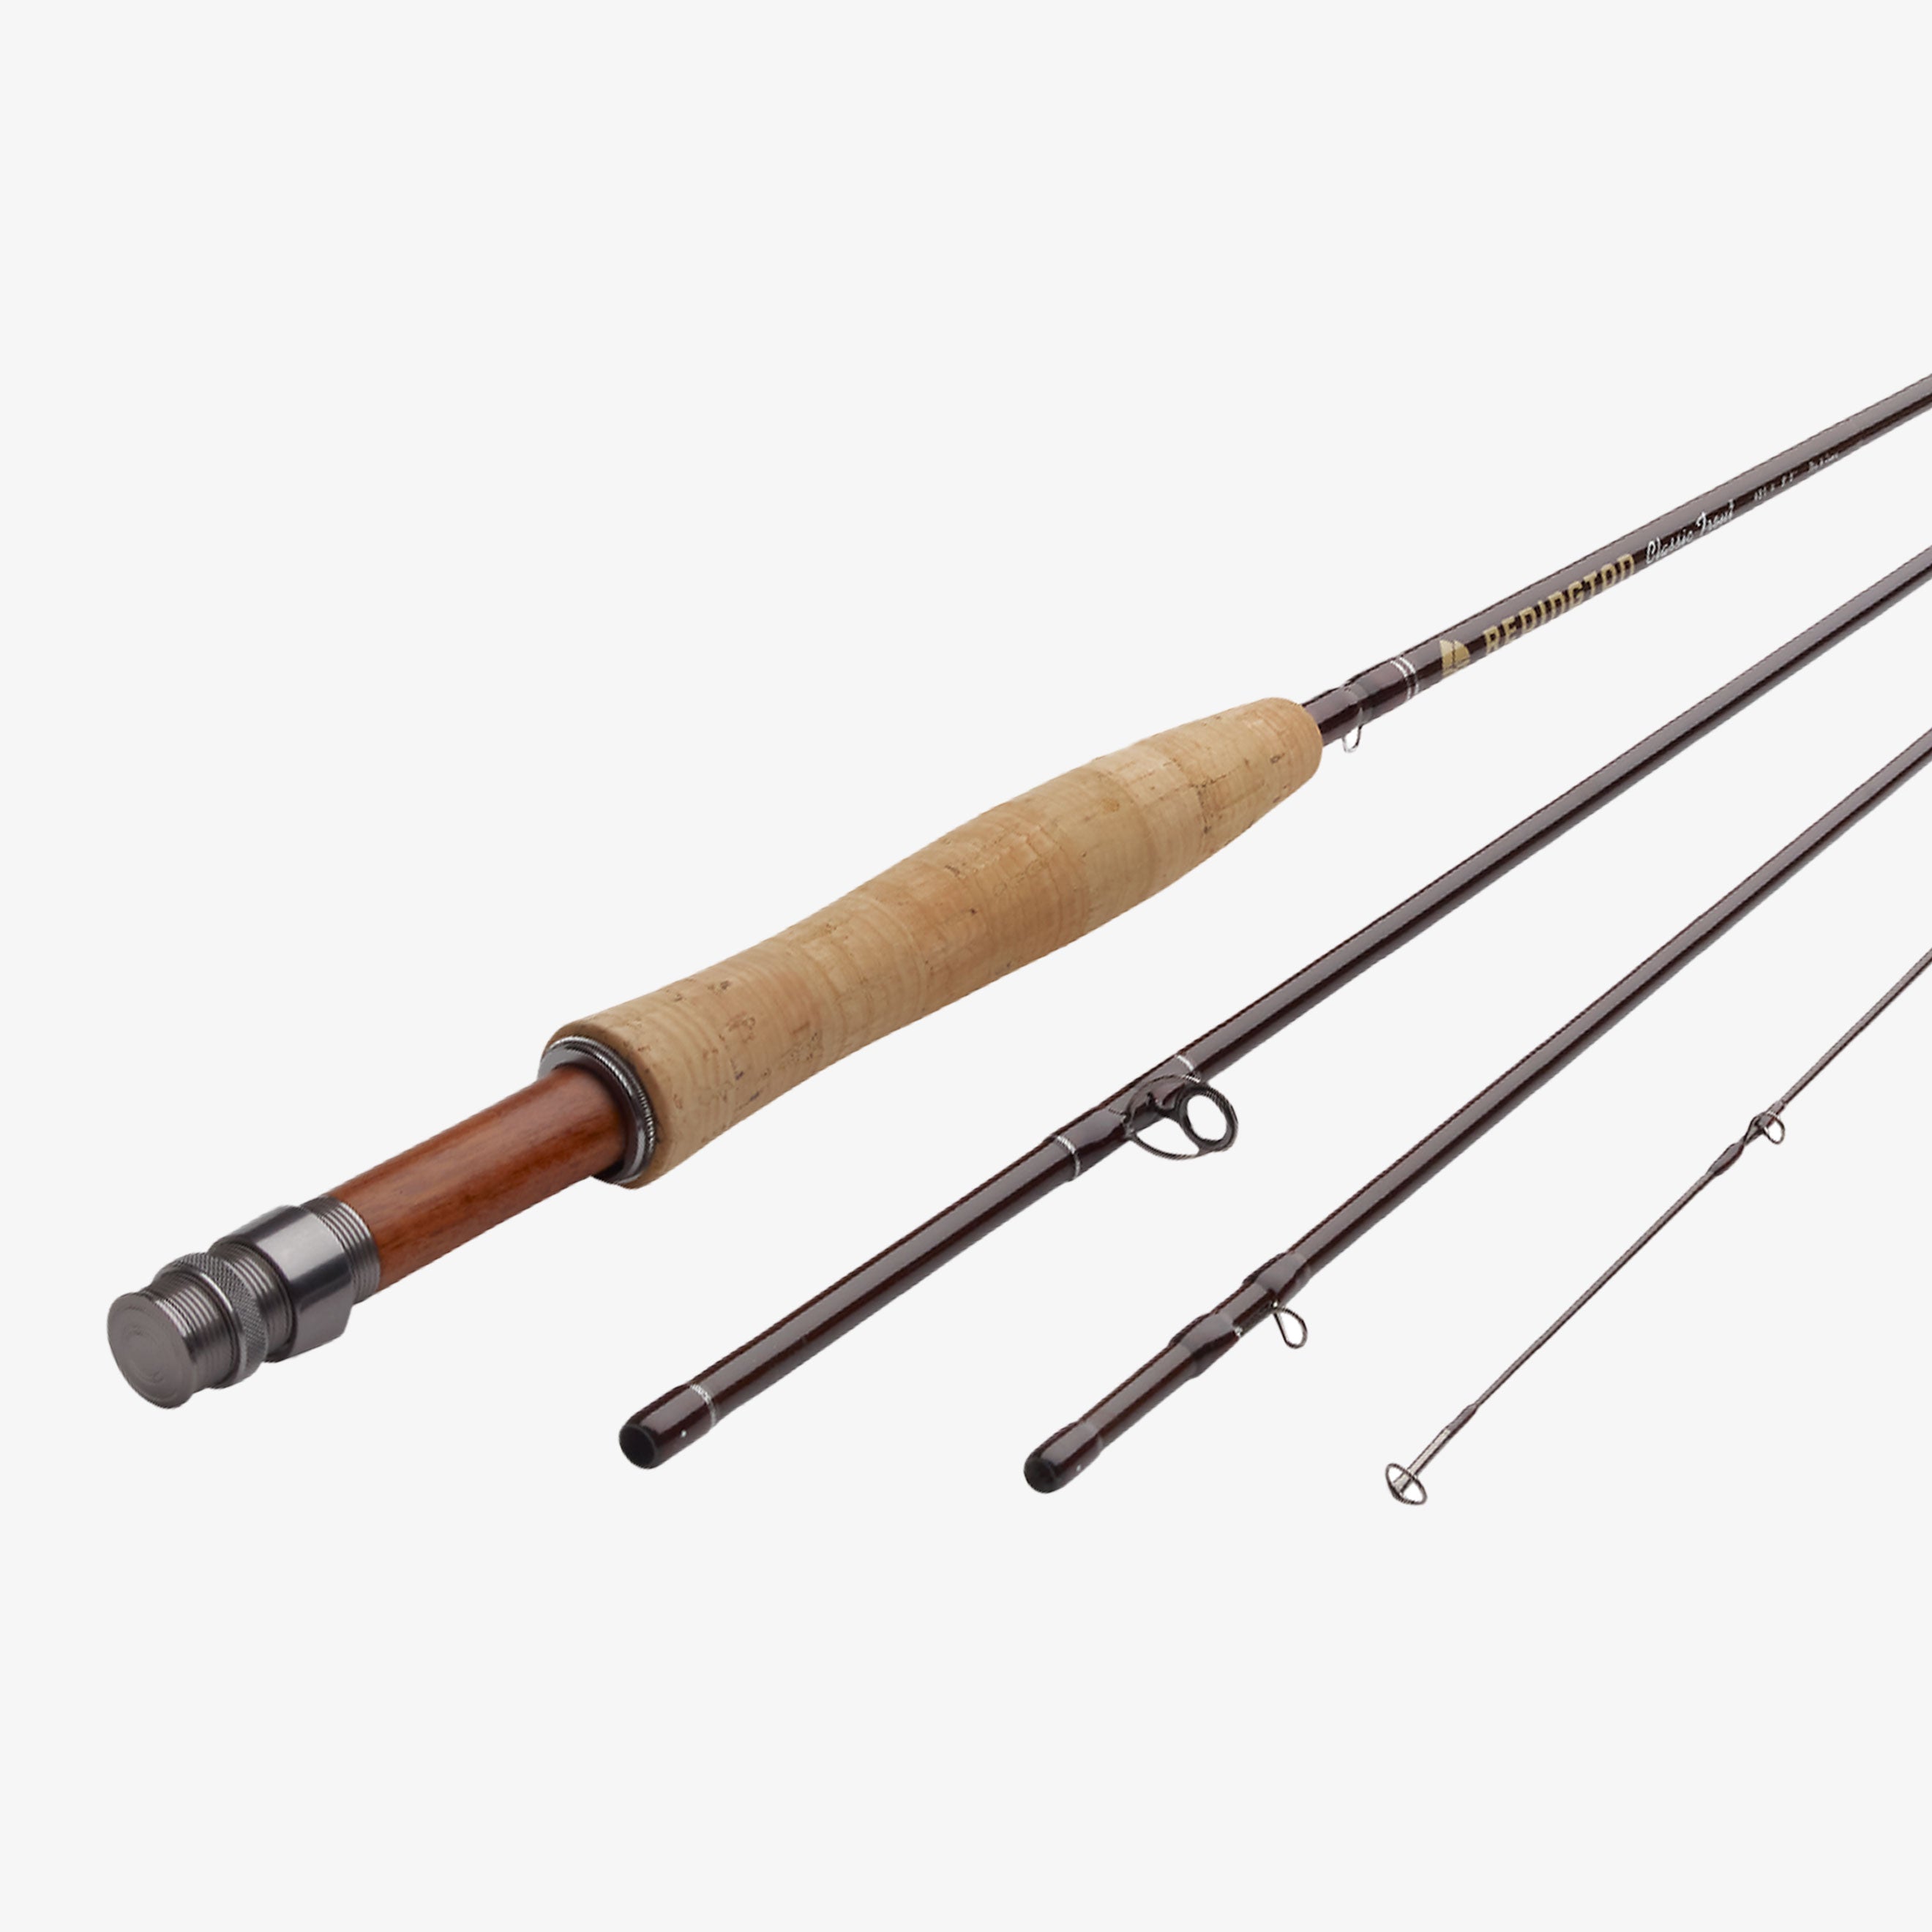 http://farbank.com/cdn/shop/products/RDT_Rods_ClassicTrout_Group_383669c2-1170-4d38-b7c9-99a36ad3d910.jpg?v=1642700279